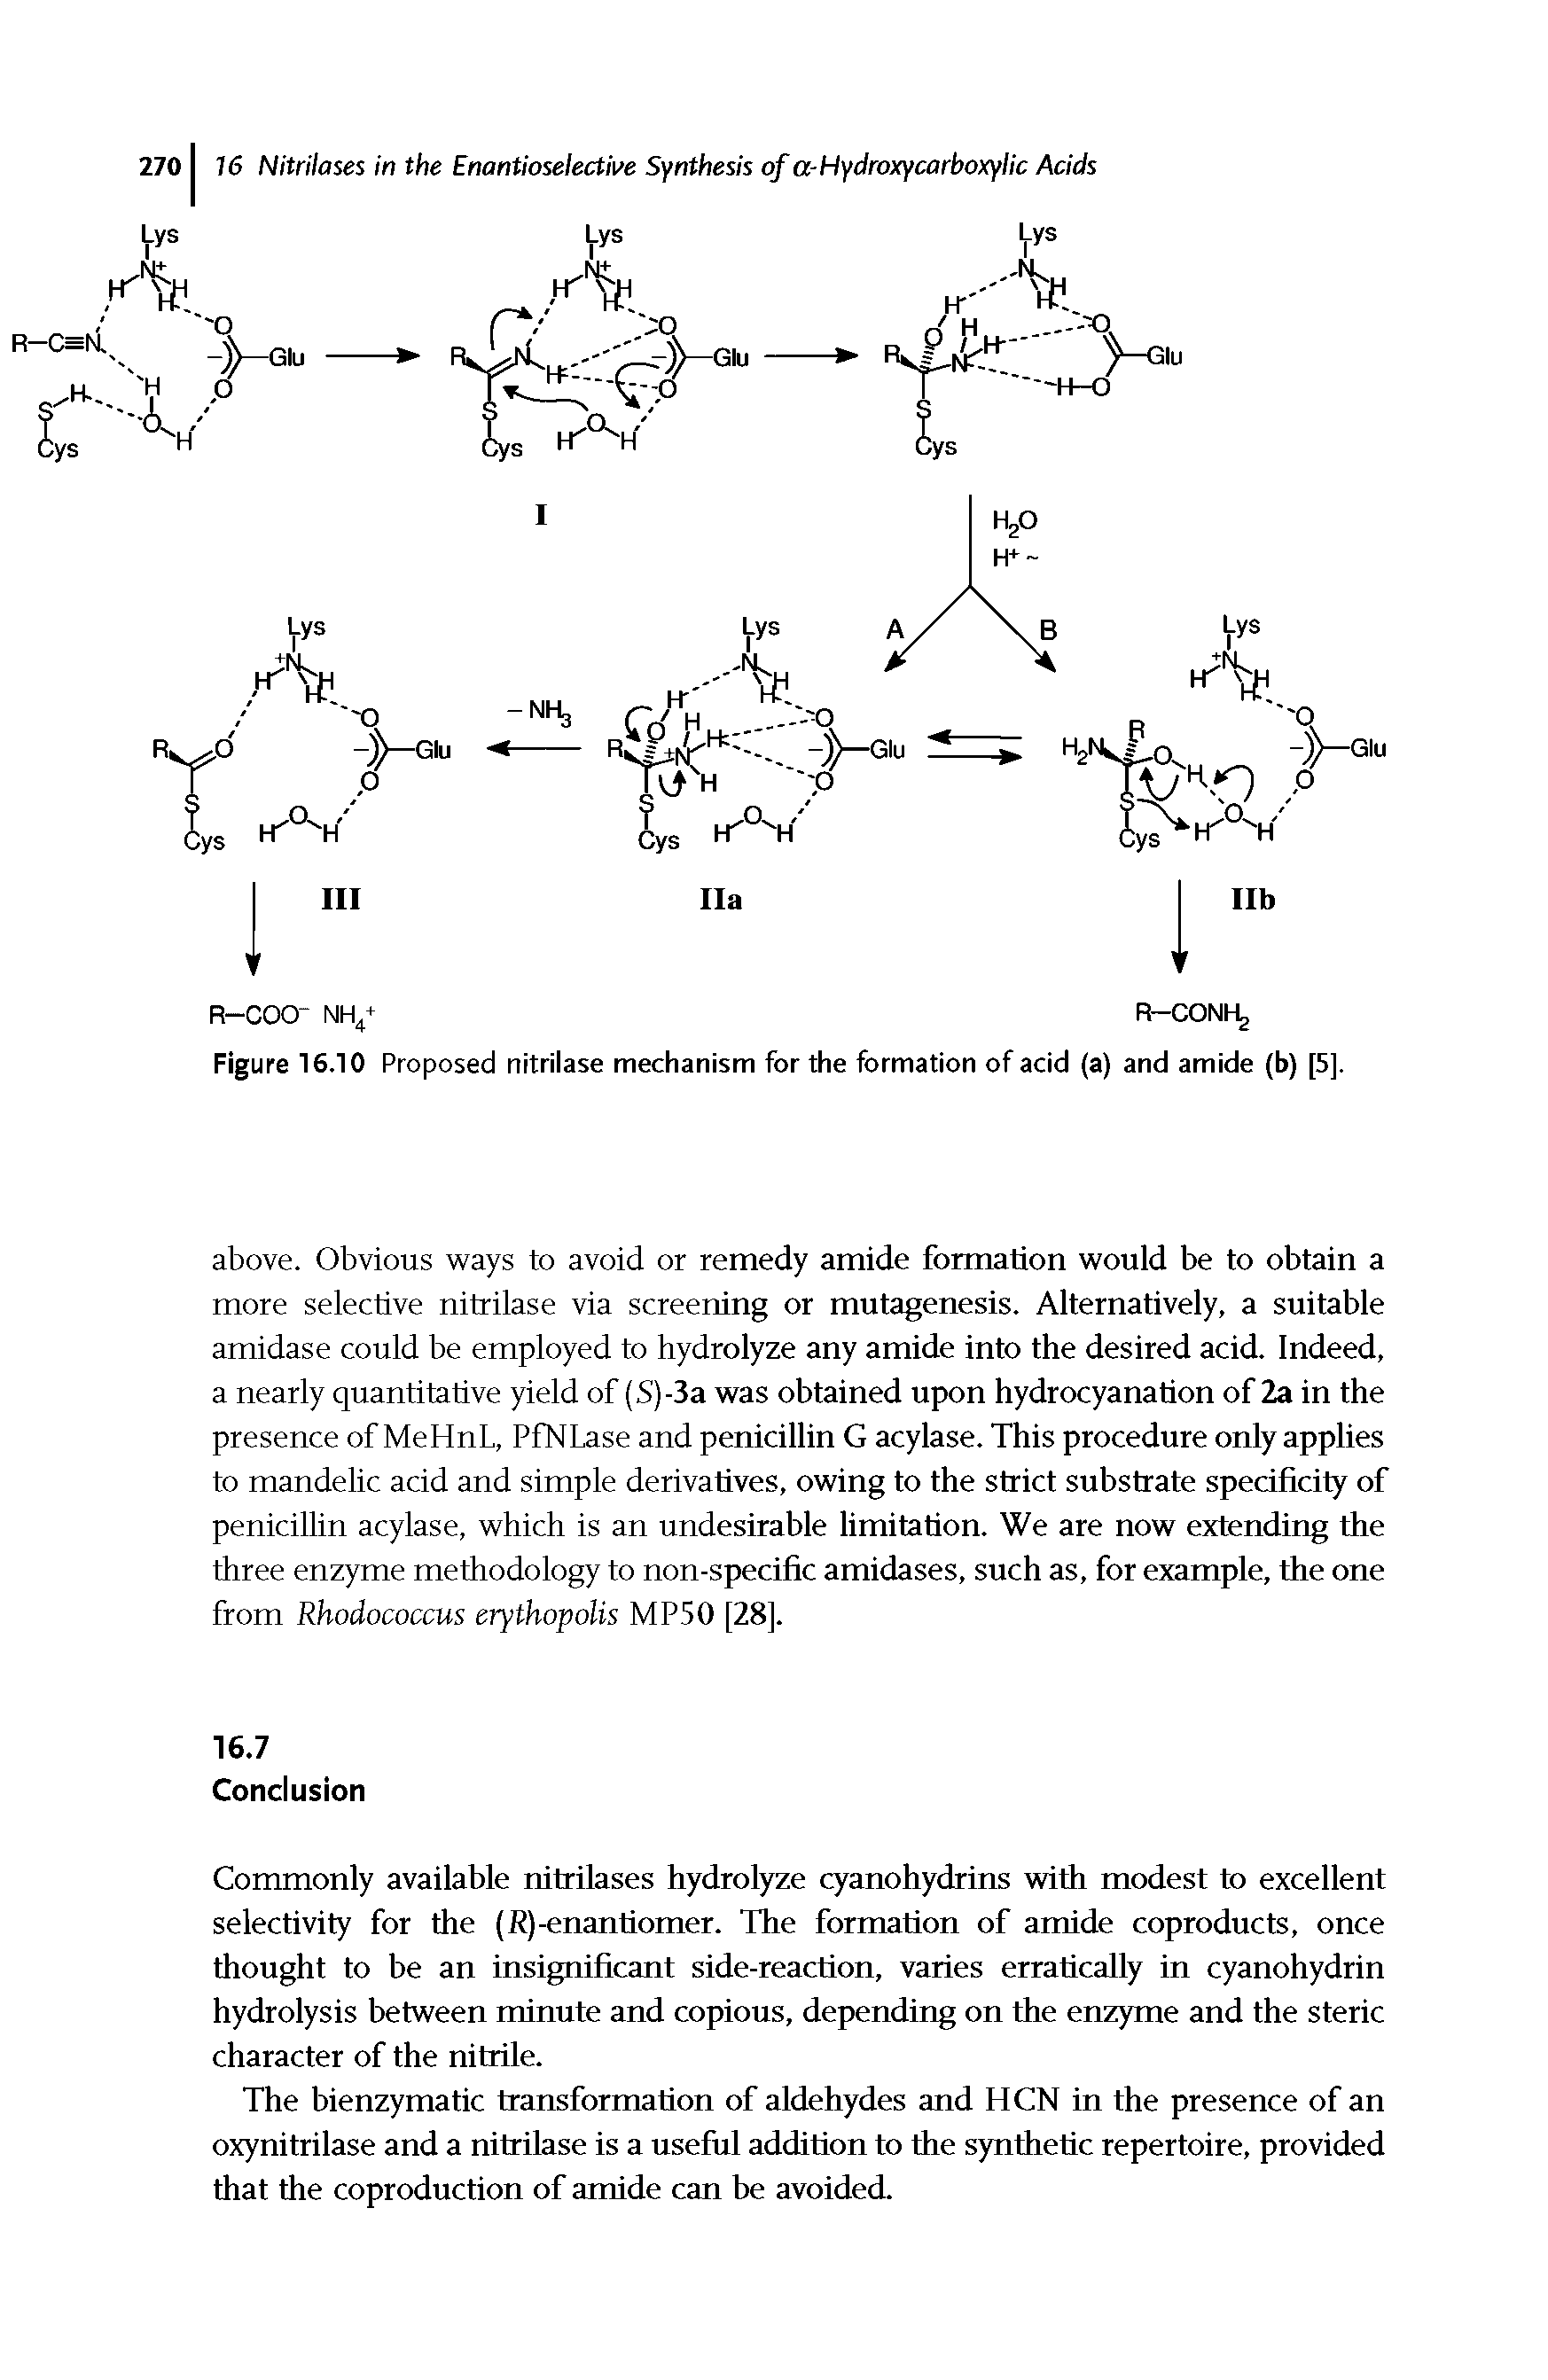 Figure 16.10 Proposecd nitrilase mechanism for the formation of acid (a) and amide (b) [5],...